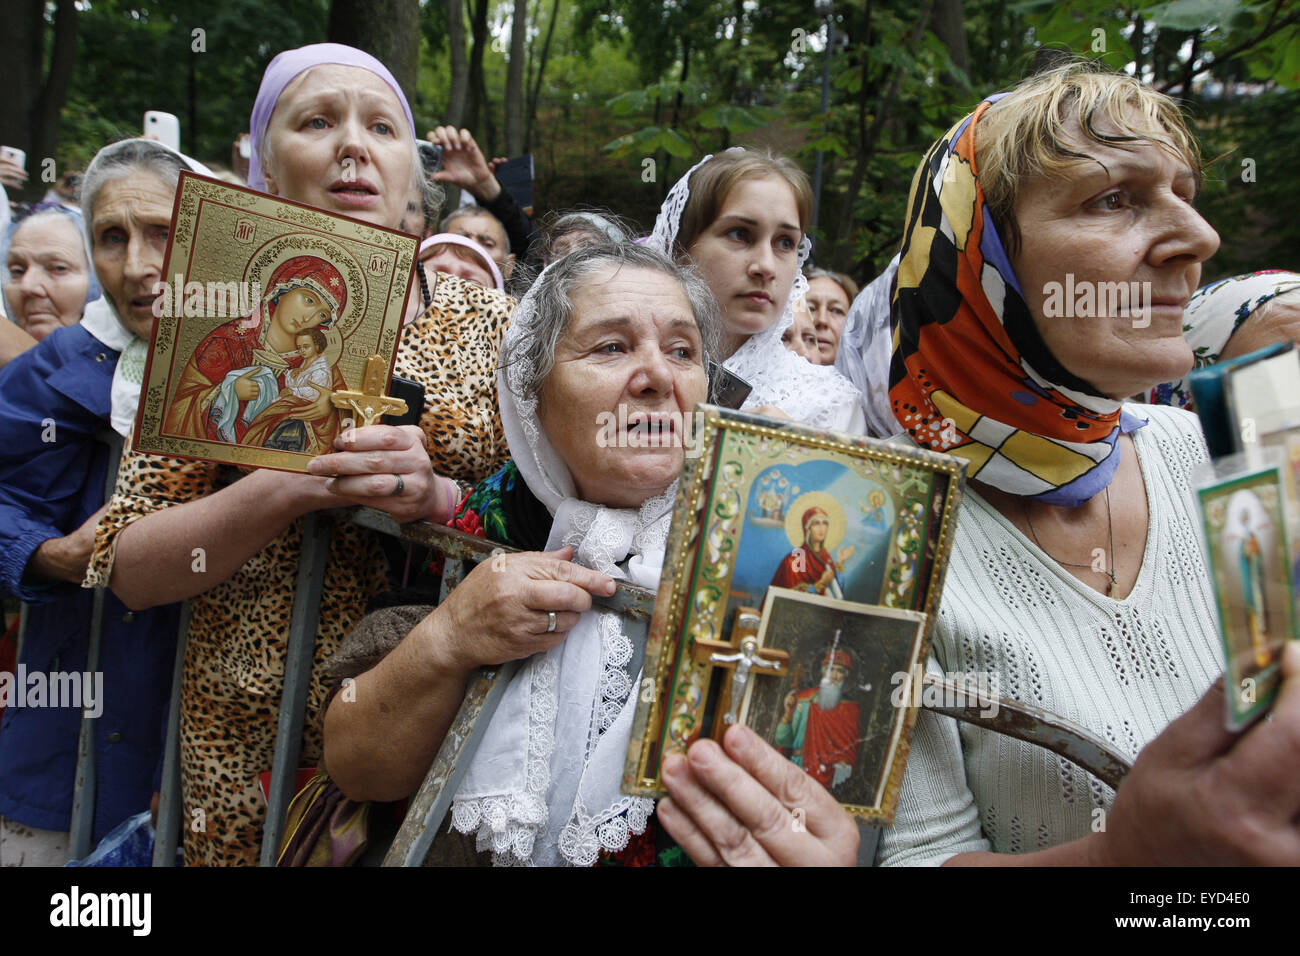 Kiev, Ukraine. 27th July, 2015. Believers from the Ukrainian Orthodox Church of Moscow Patriarchate in a prayer service marking the 1000th anniversary of the Repose of Vladimir the Great at St. Vladimirs Hill in Kiev, Ukraine, 27 July 2015. The Grand Prince of Kiev, Vladimir the Great, also known as St. Vladimir, Vladimir the Baptizer of Rus and Vladimir the Red Sun, was the first Christian ruler in the Kievan Rus who christianized the region. Orthodox believers will mark the 1027th anniversary of Kievan Rus Christianization on 28 July. © Serg Glovny/ZUMA Wire/Alamy Live News Stock Photo